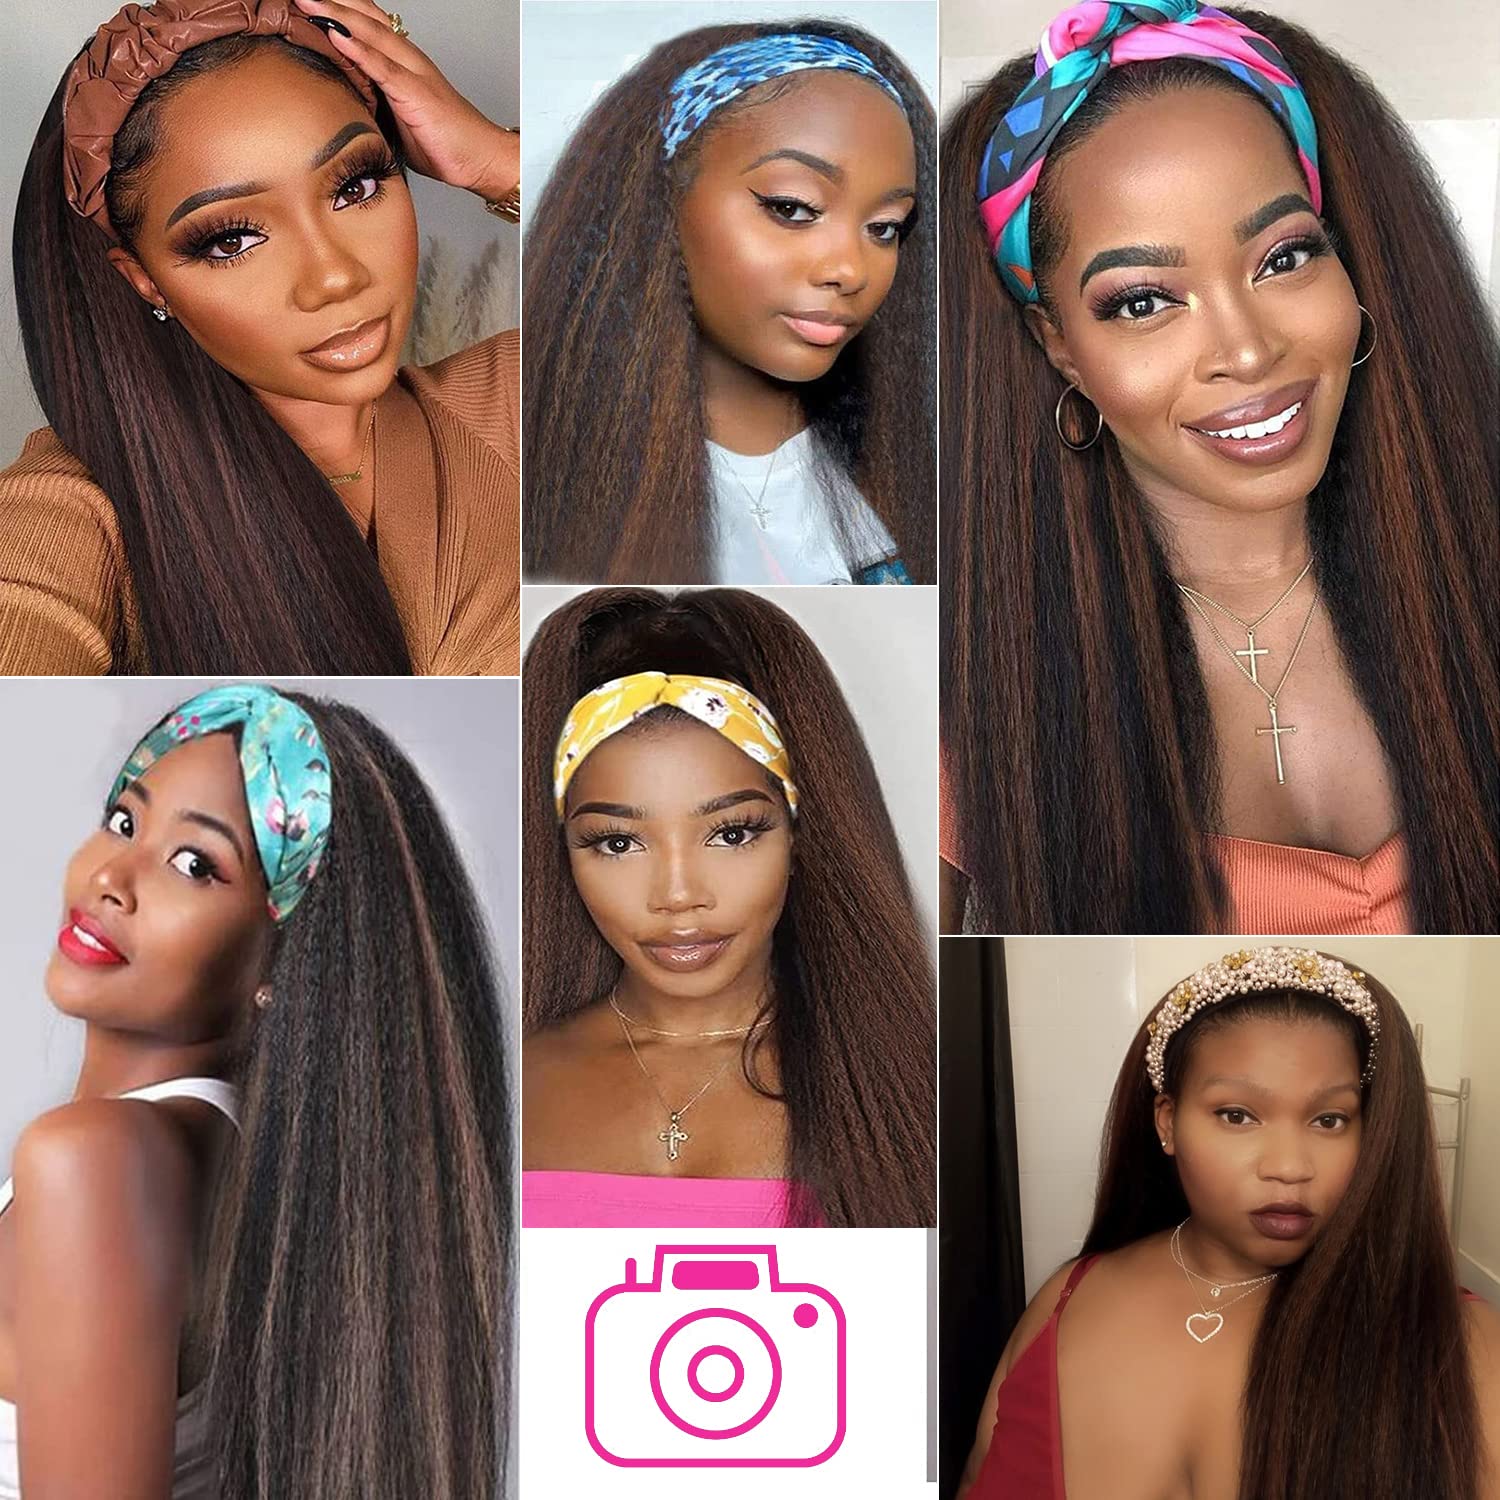 Straight Headband Wigs for Women Long Black Yaki Straight Headband Wig Synthetic Afro Wig with Headbands Attached Glueless None Lace Front Wig 22inch for Daily